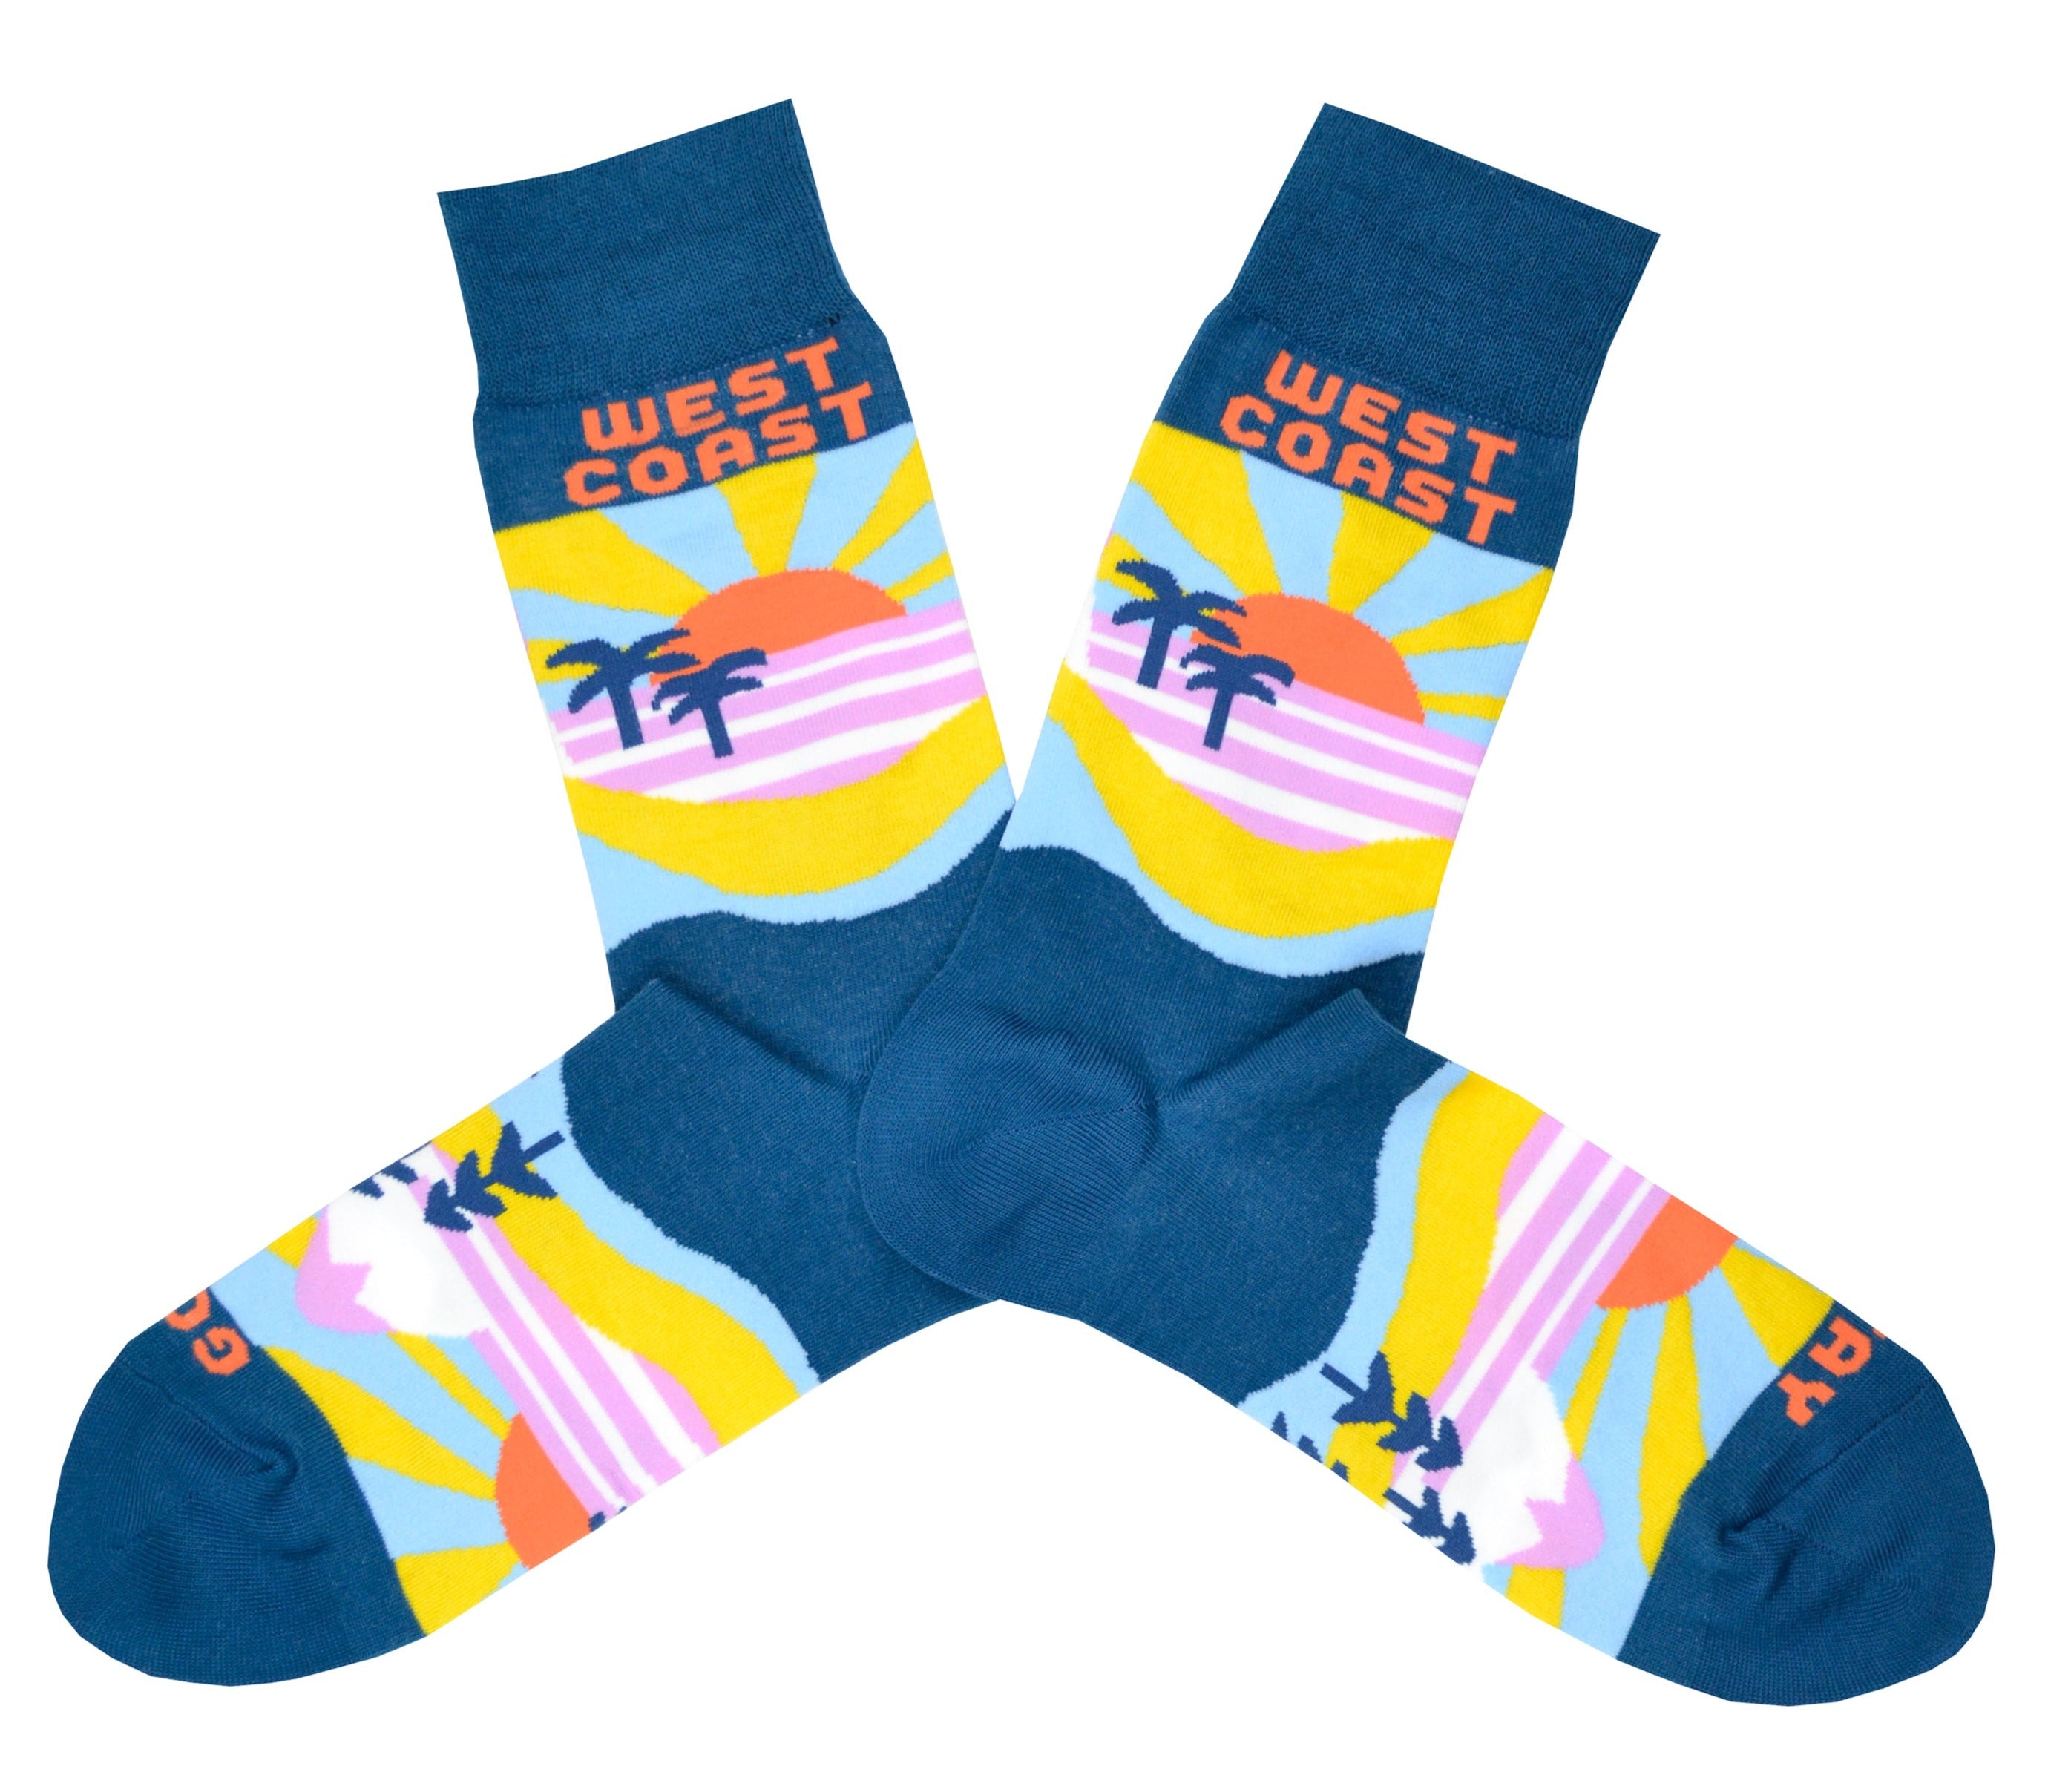 These blue cotton men's novelty crew socks by the brand Yellow Owl Workshop feature an orange and yellow sun setting over a pink landscape with blue palm trees and say the words 